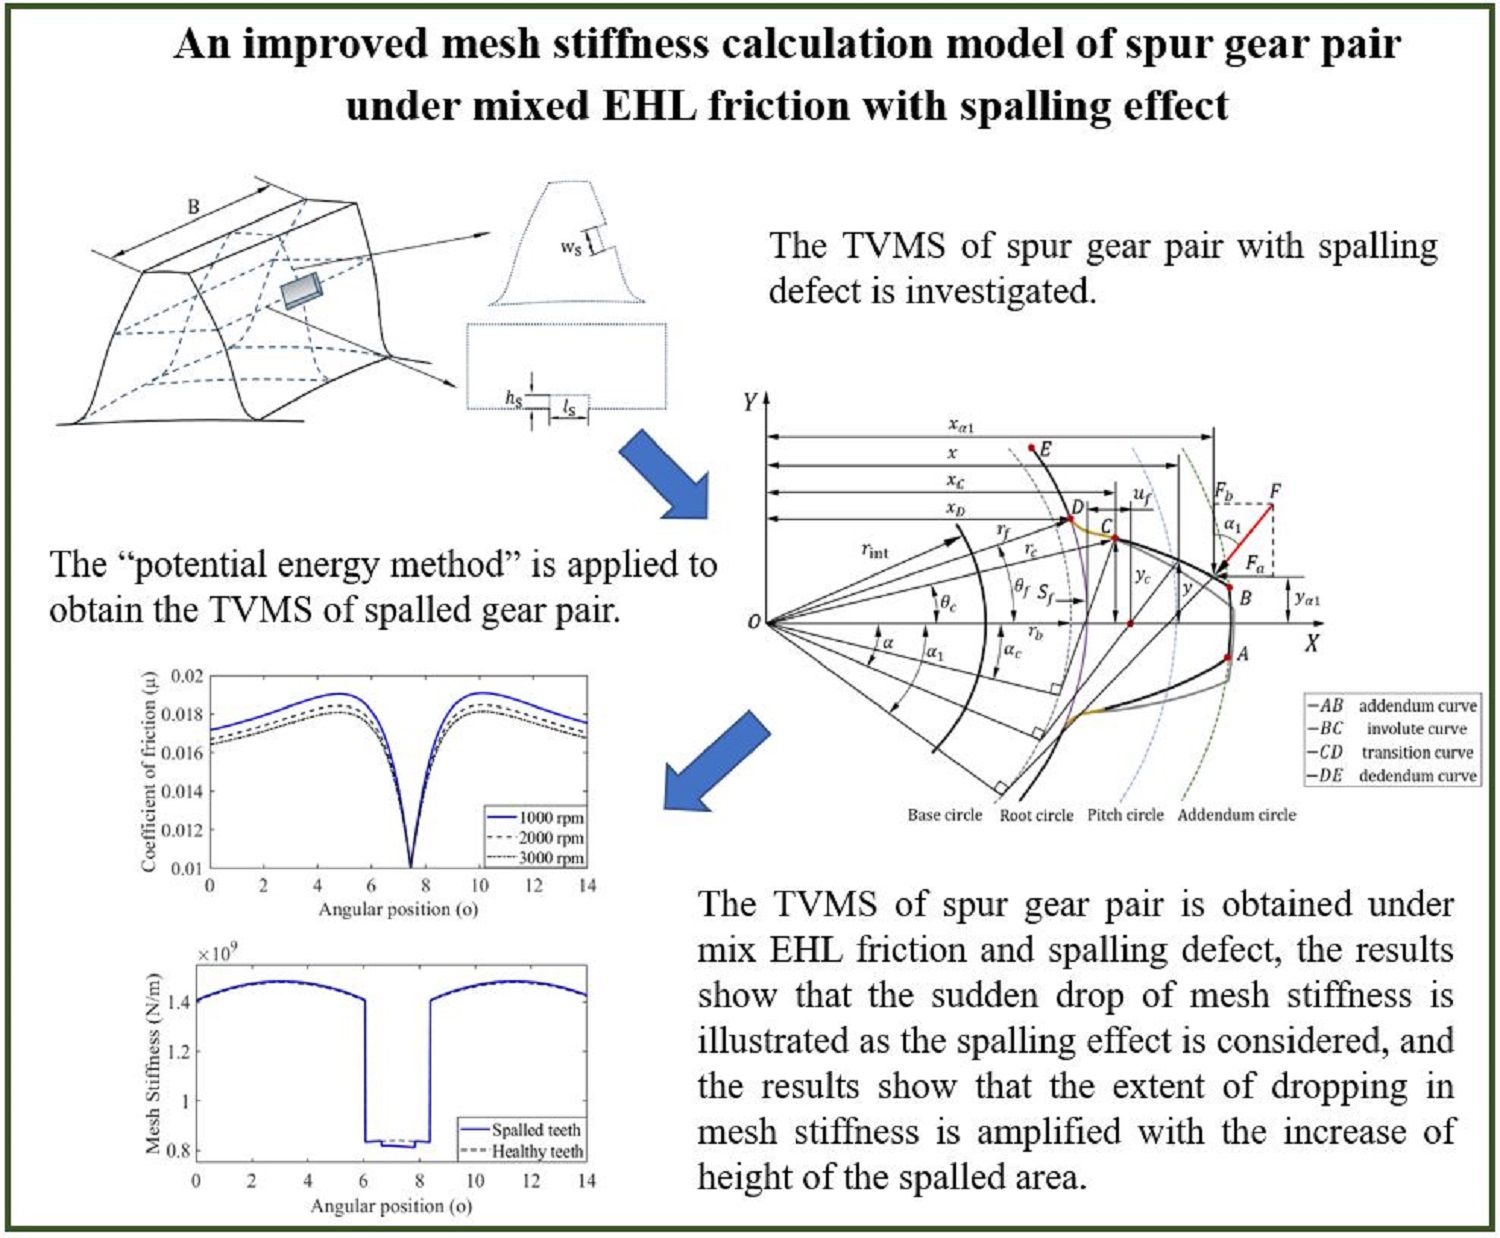 An improved mesh stiffness calculation model of spur gear pair under mixed EHL friction with spalling effect